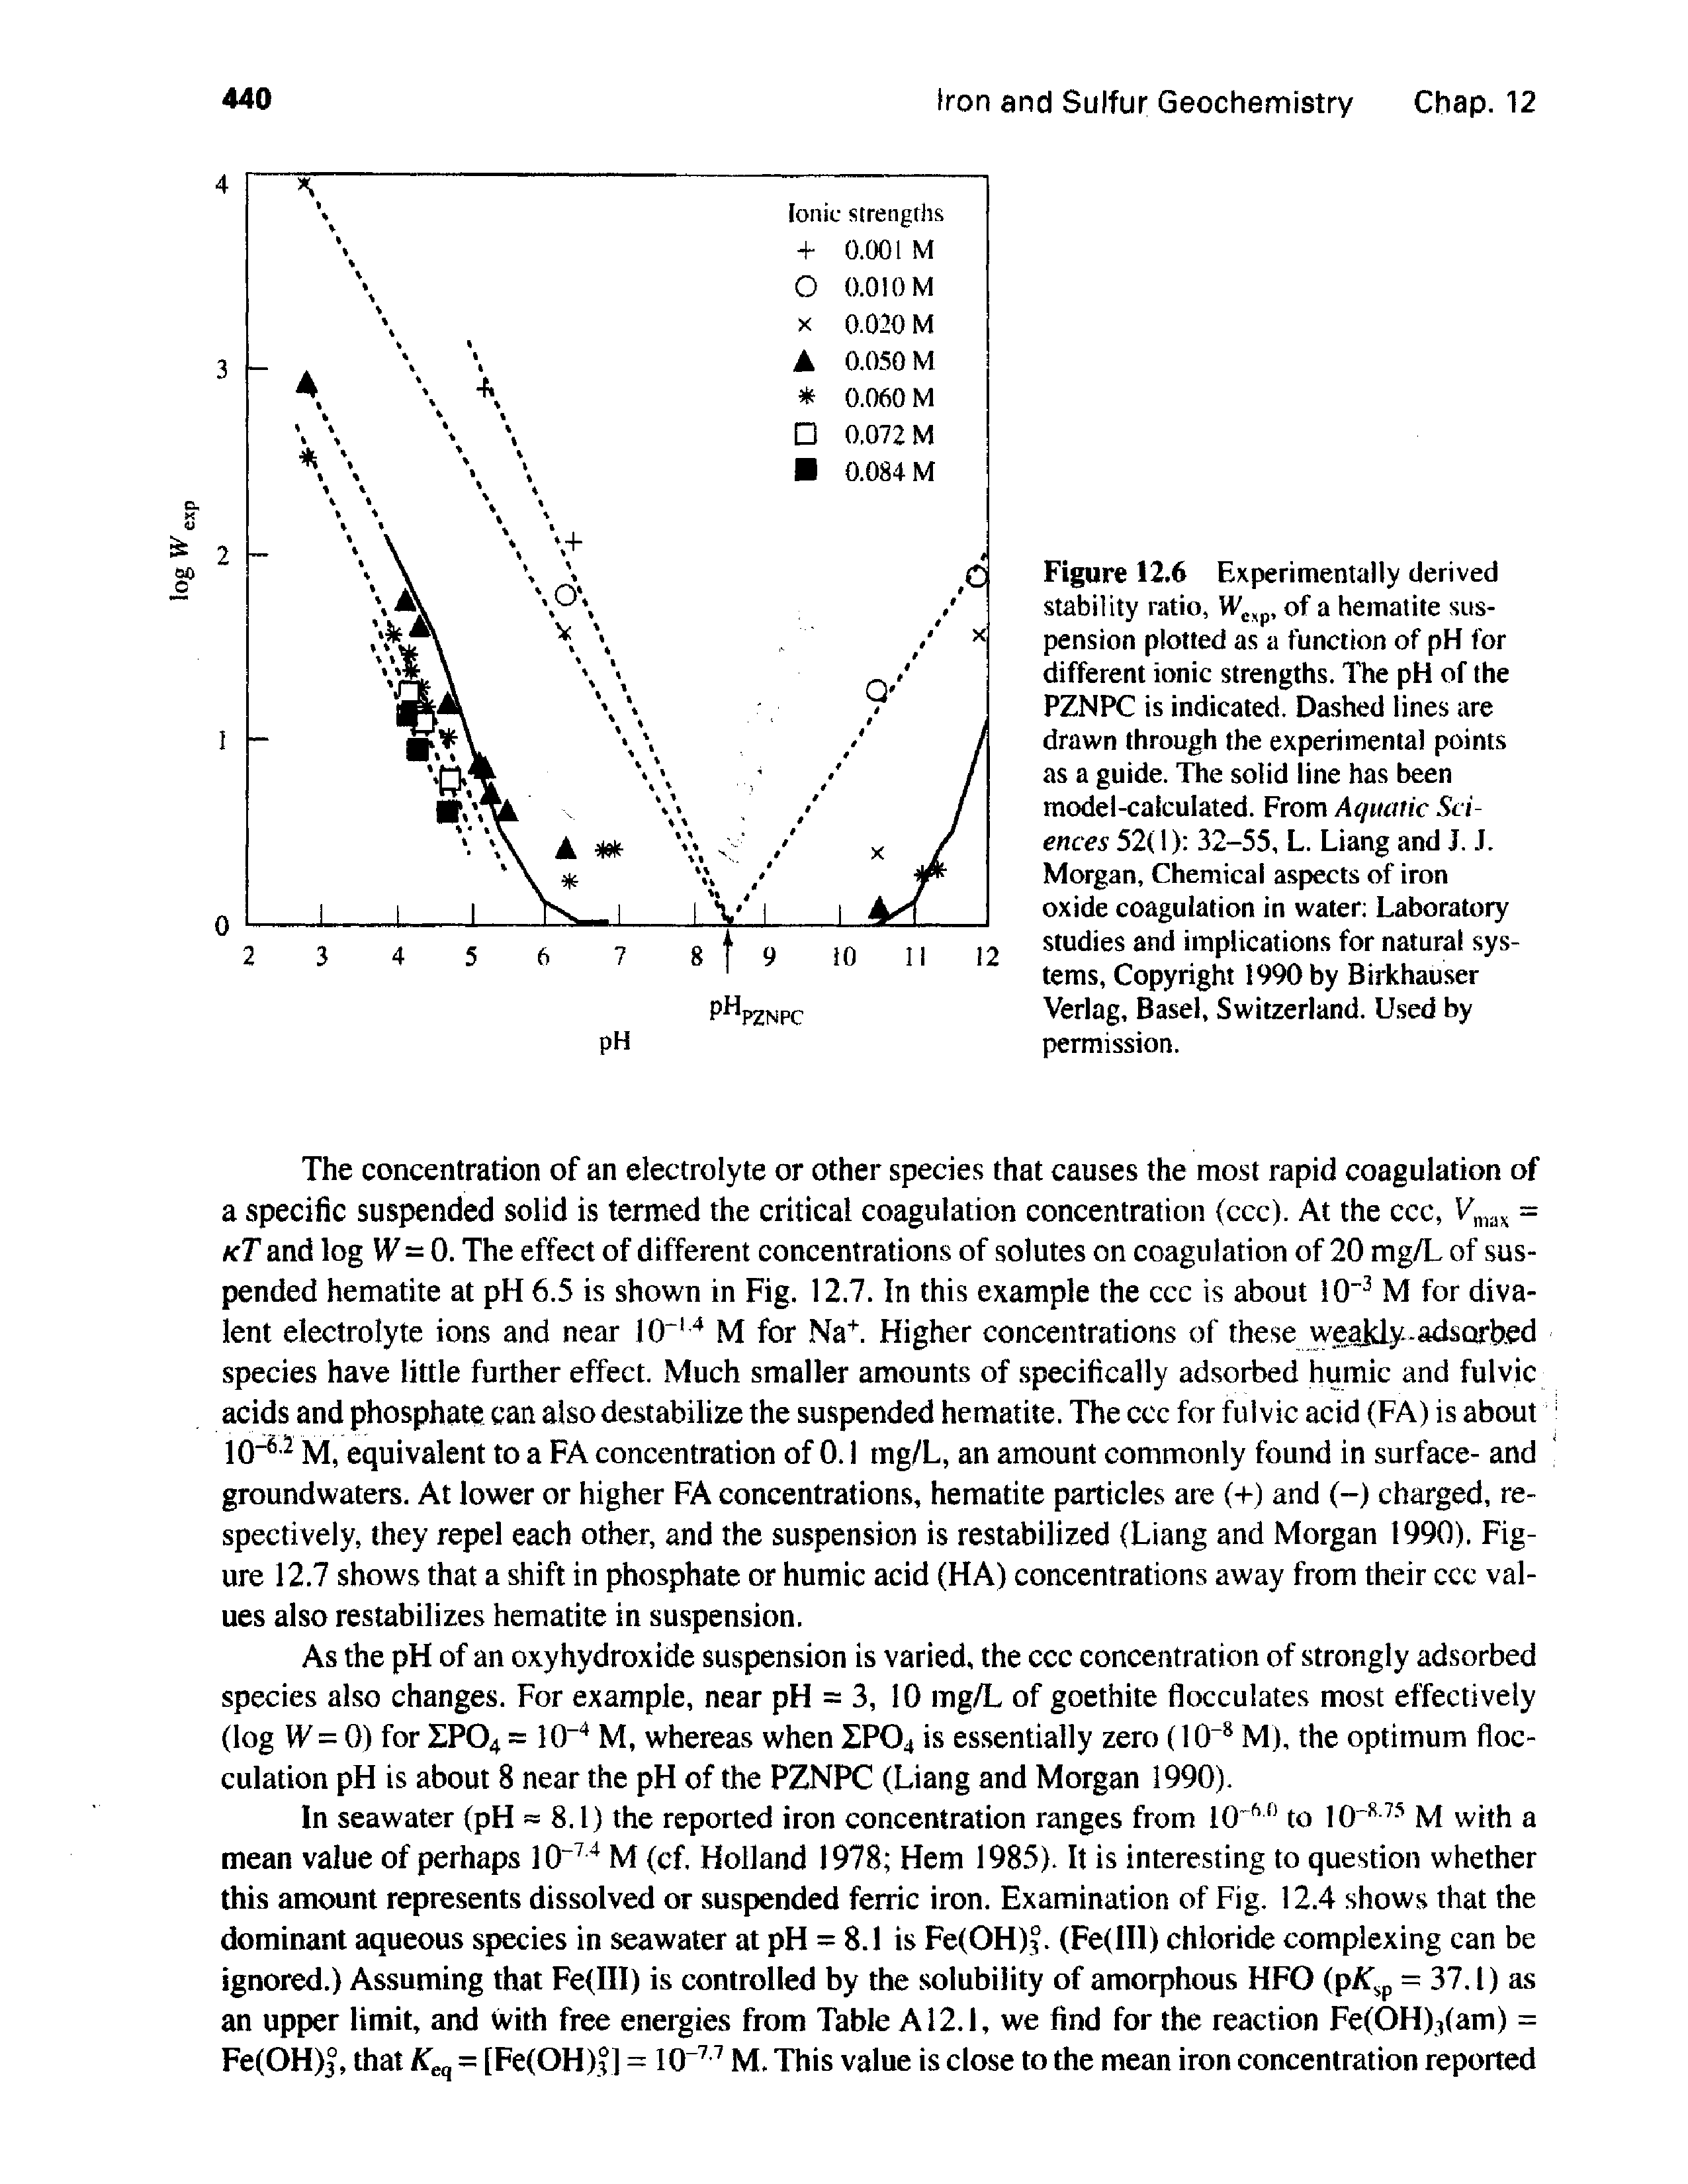 Figure 12.6 Experimentally derived stability ratio, of a hematite suspension plotted as a function of pH for different ionic strengths. The pH of the PZNPC is indicated. Dashed lines are drawn through the experimental points as a guide. The solid line has been model-calculated. From Ae/uaric Sciences 52(1) 32-55, L. Liang and J. J. Morgan, Chemical aspects of iron oxide coagulation in water Laboratory studies and implications for natural systems, Copyright 1990 by Birkhauser Verlag, Basel, Switzerland. Used by permission.